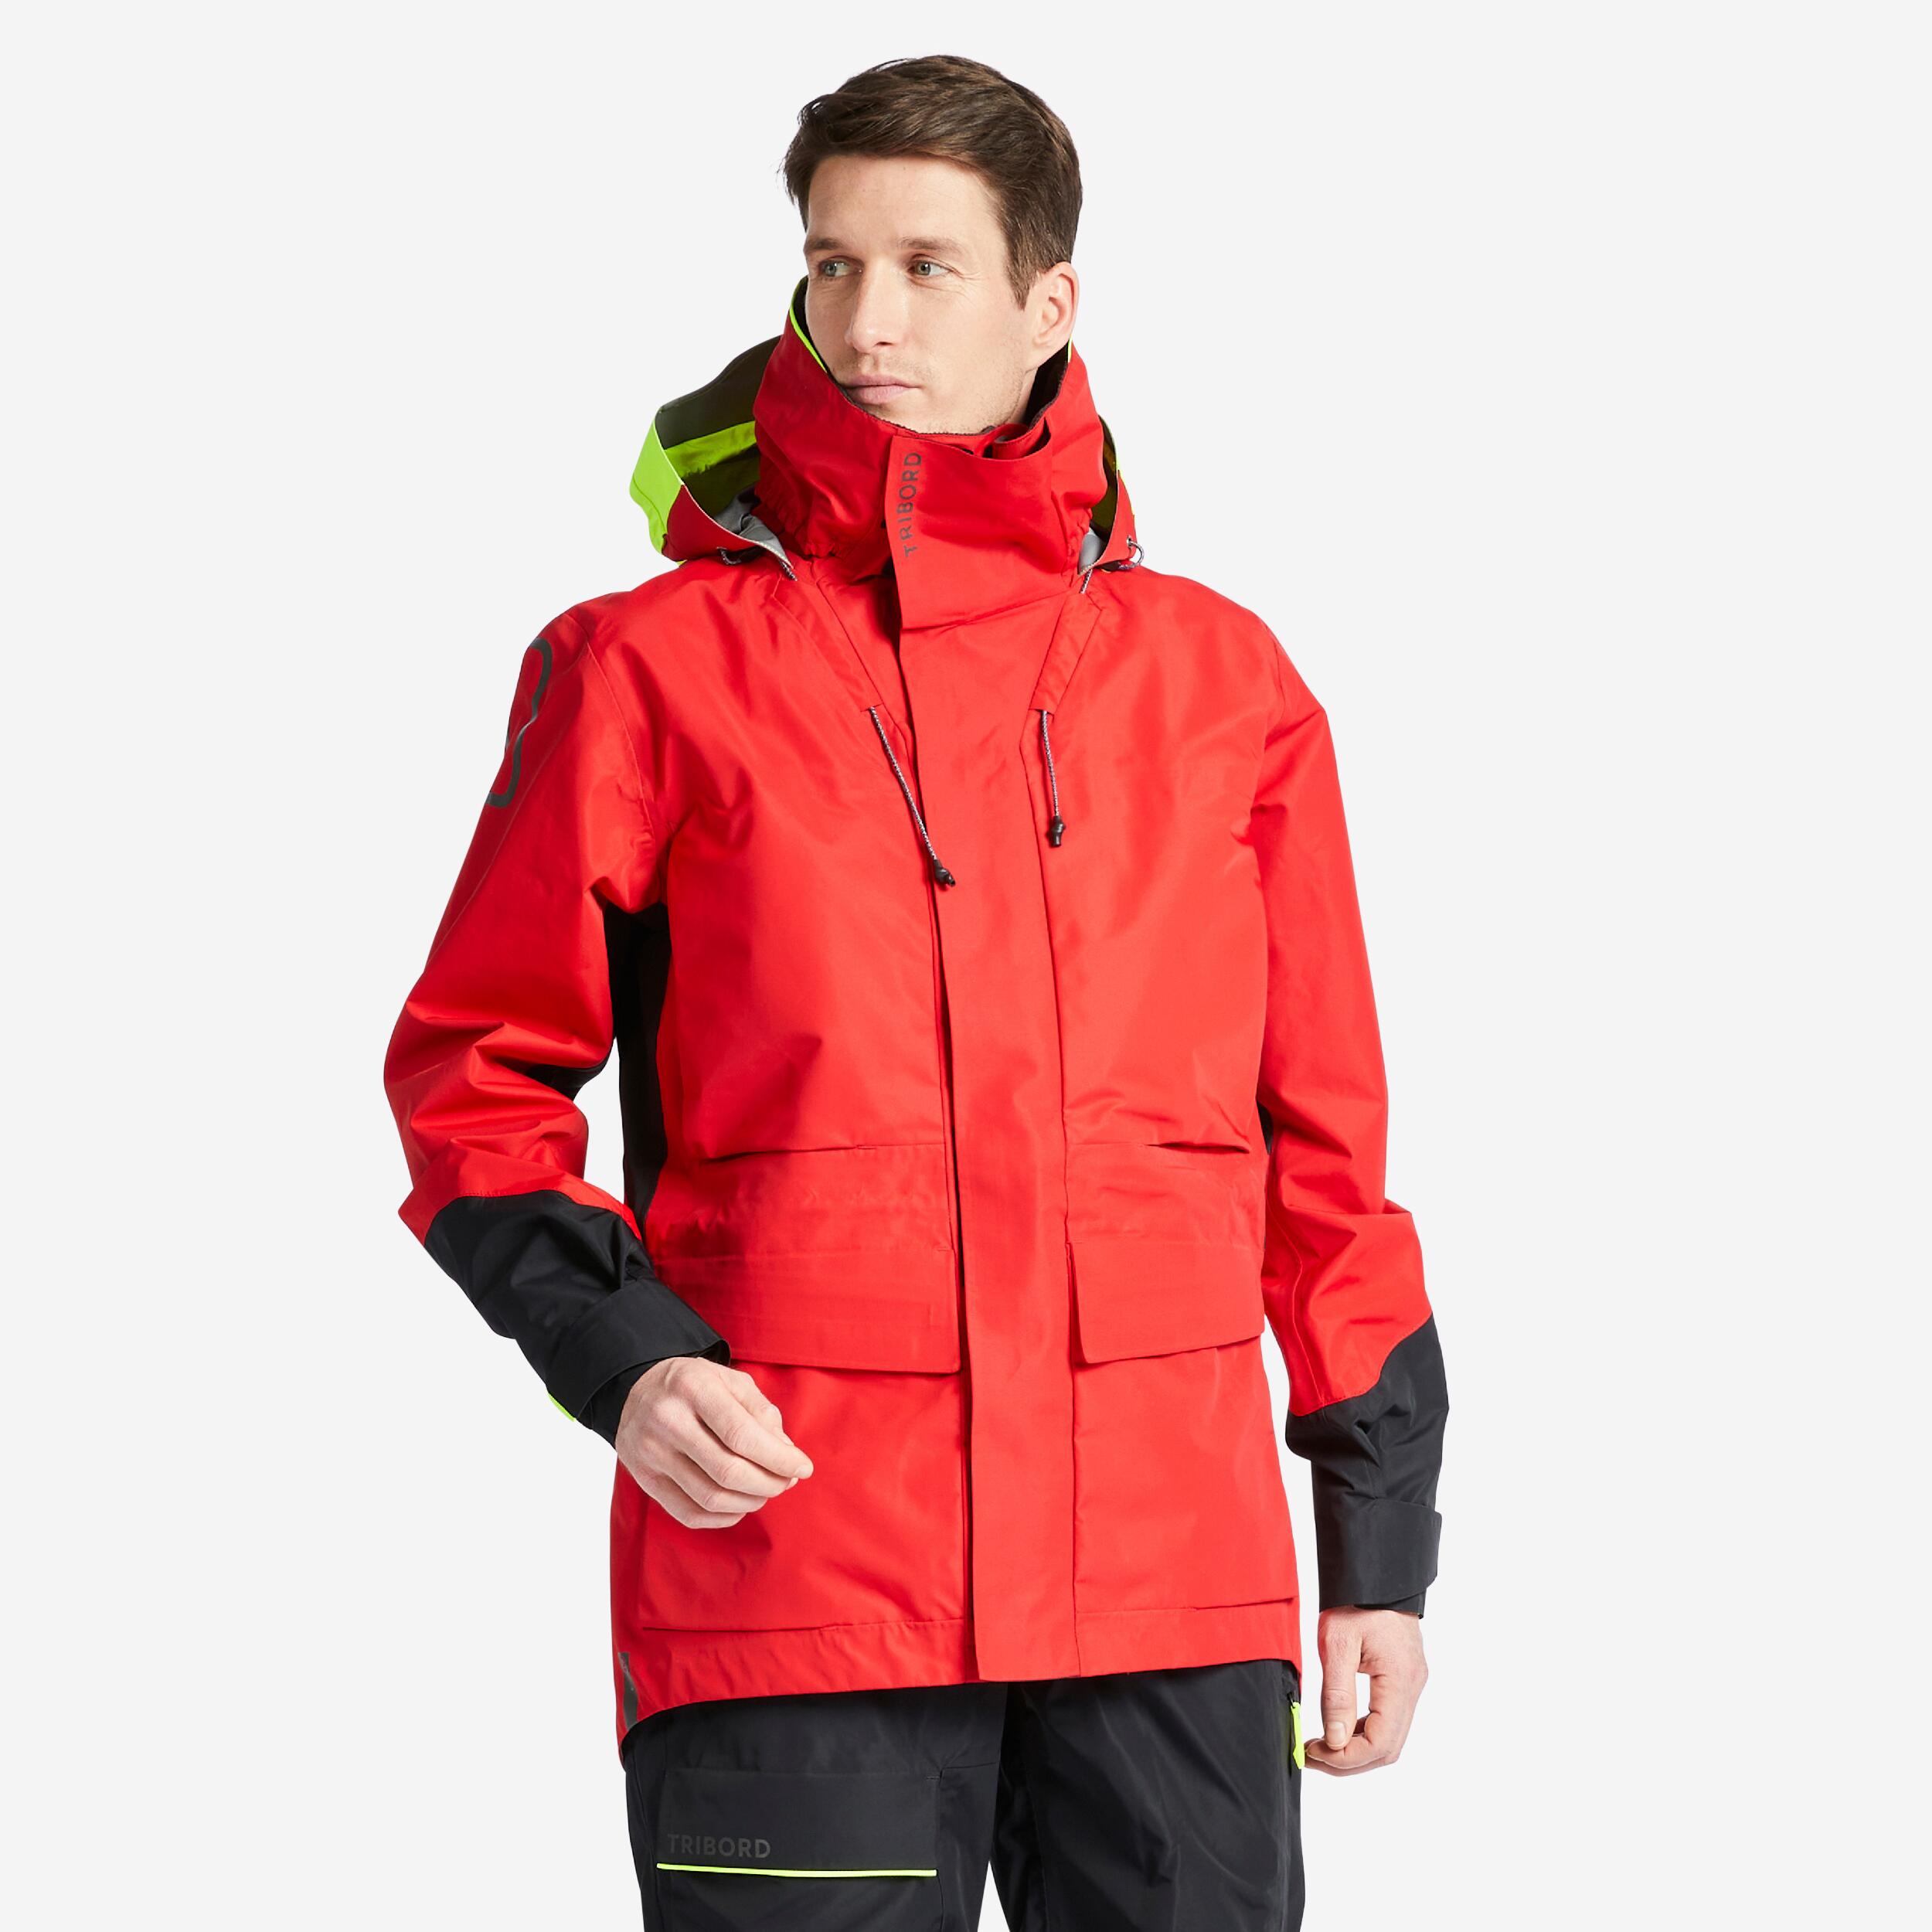 Men’s Offshore Sailing Jacket - 900 Red